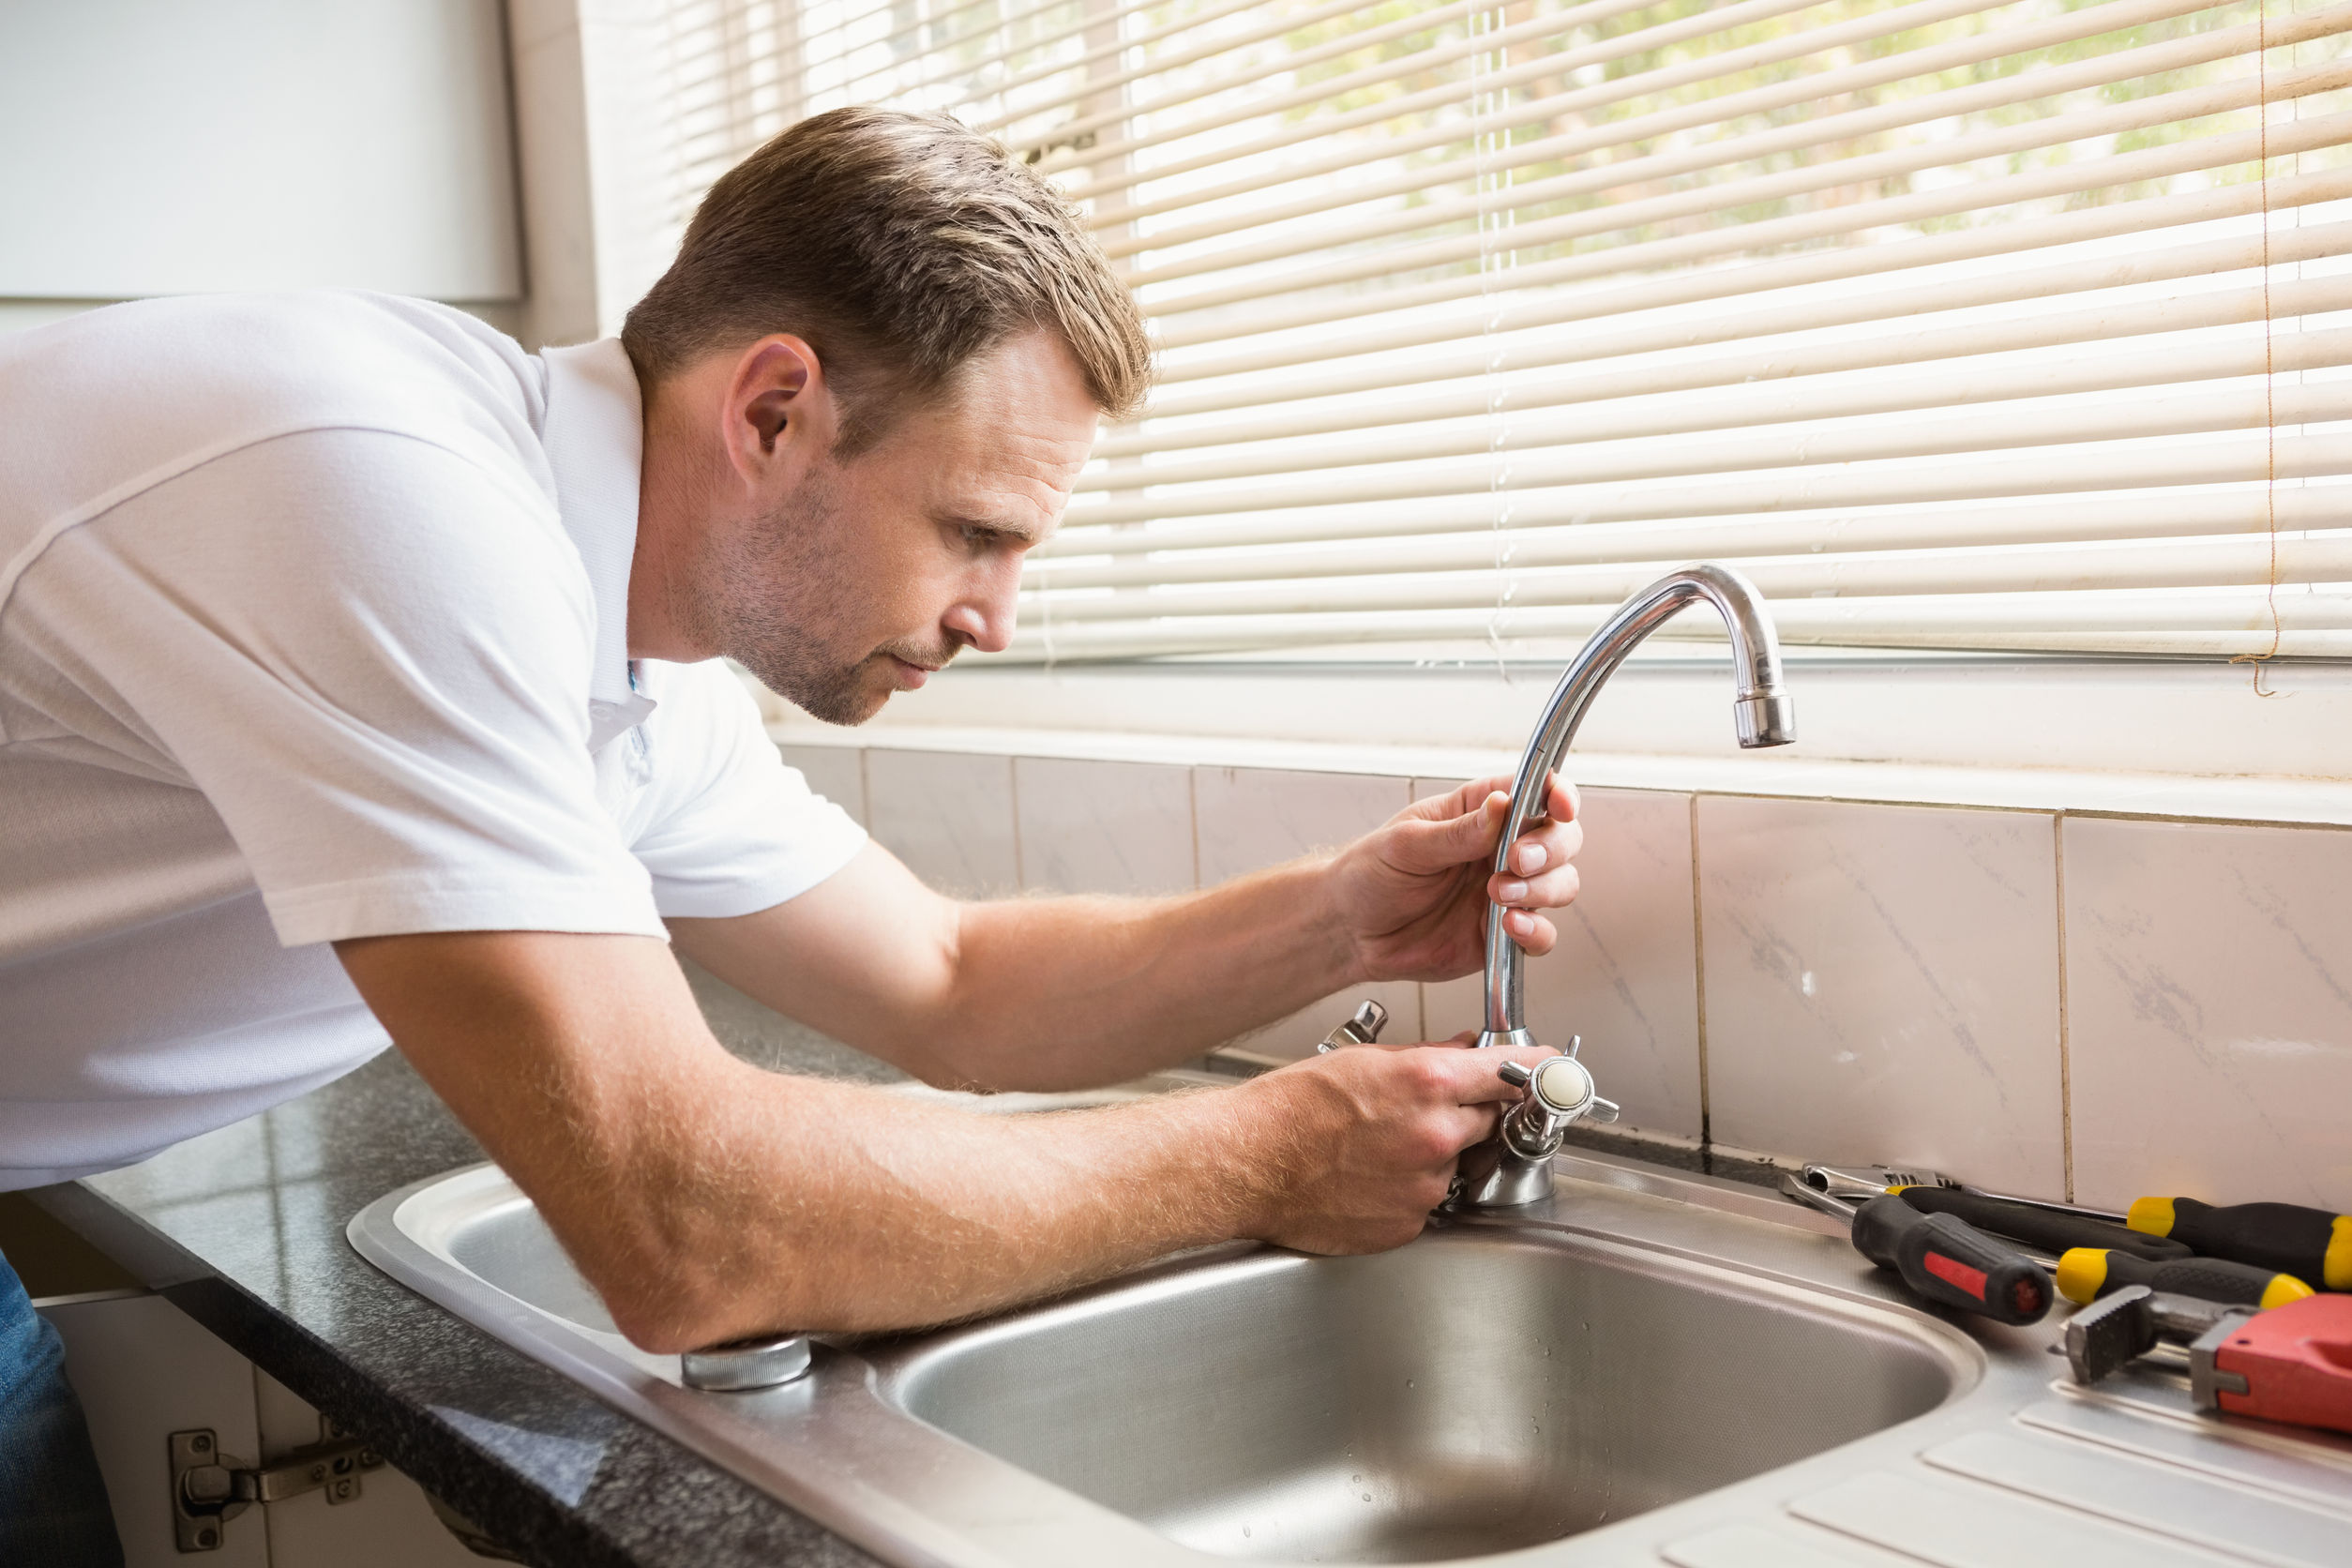 Drain Cleaning: What it is and How to Tell if Your Home Needs it